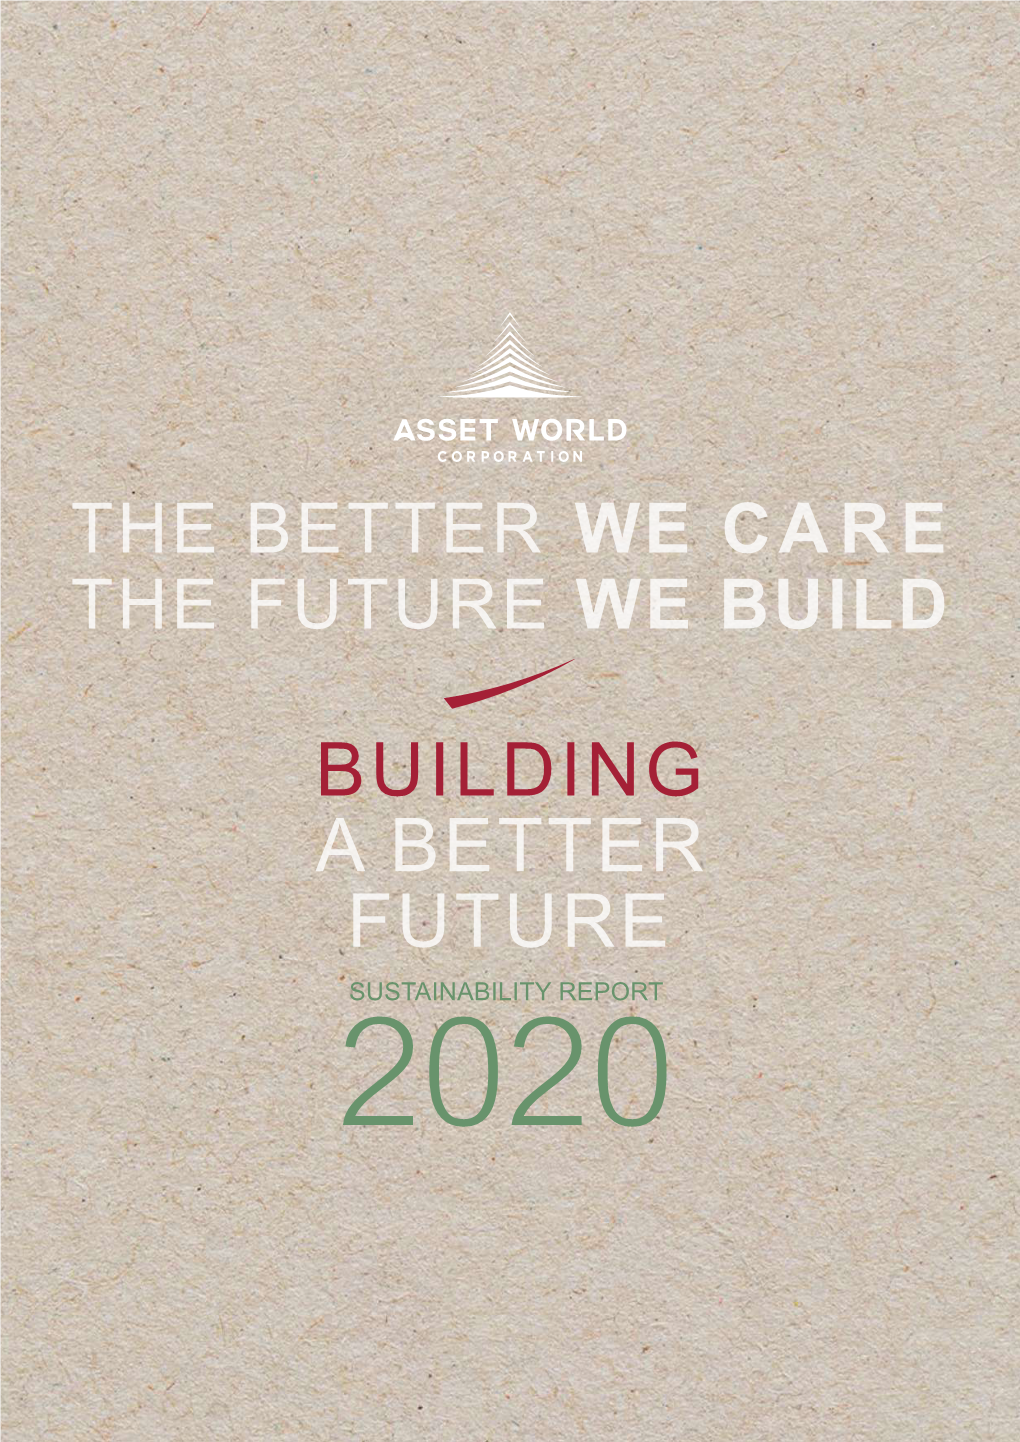 The Better We Care the Future We Build